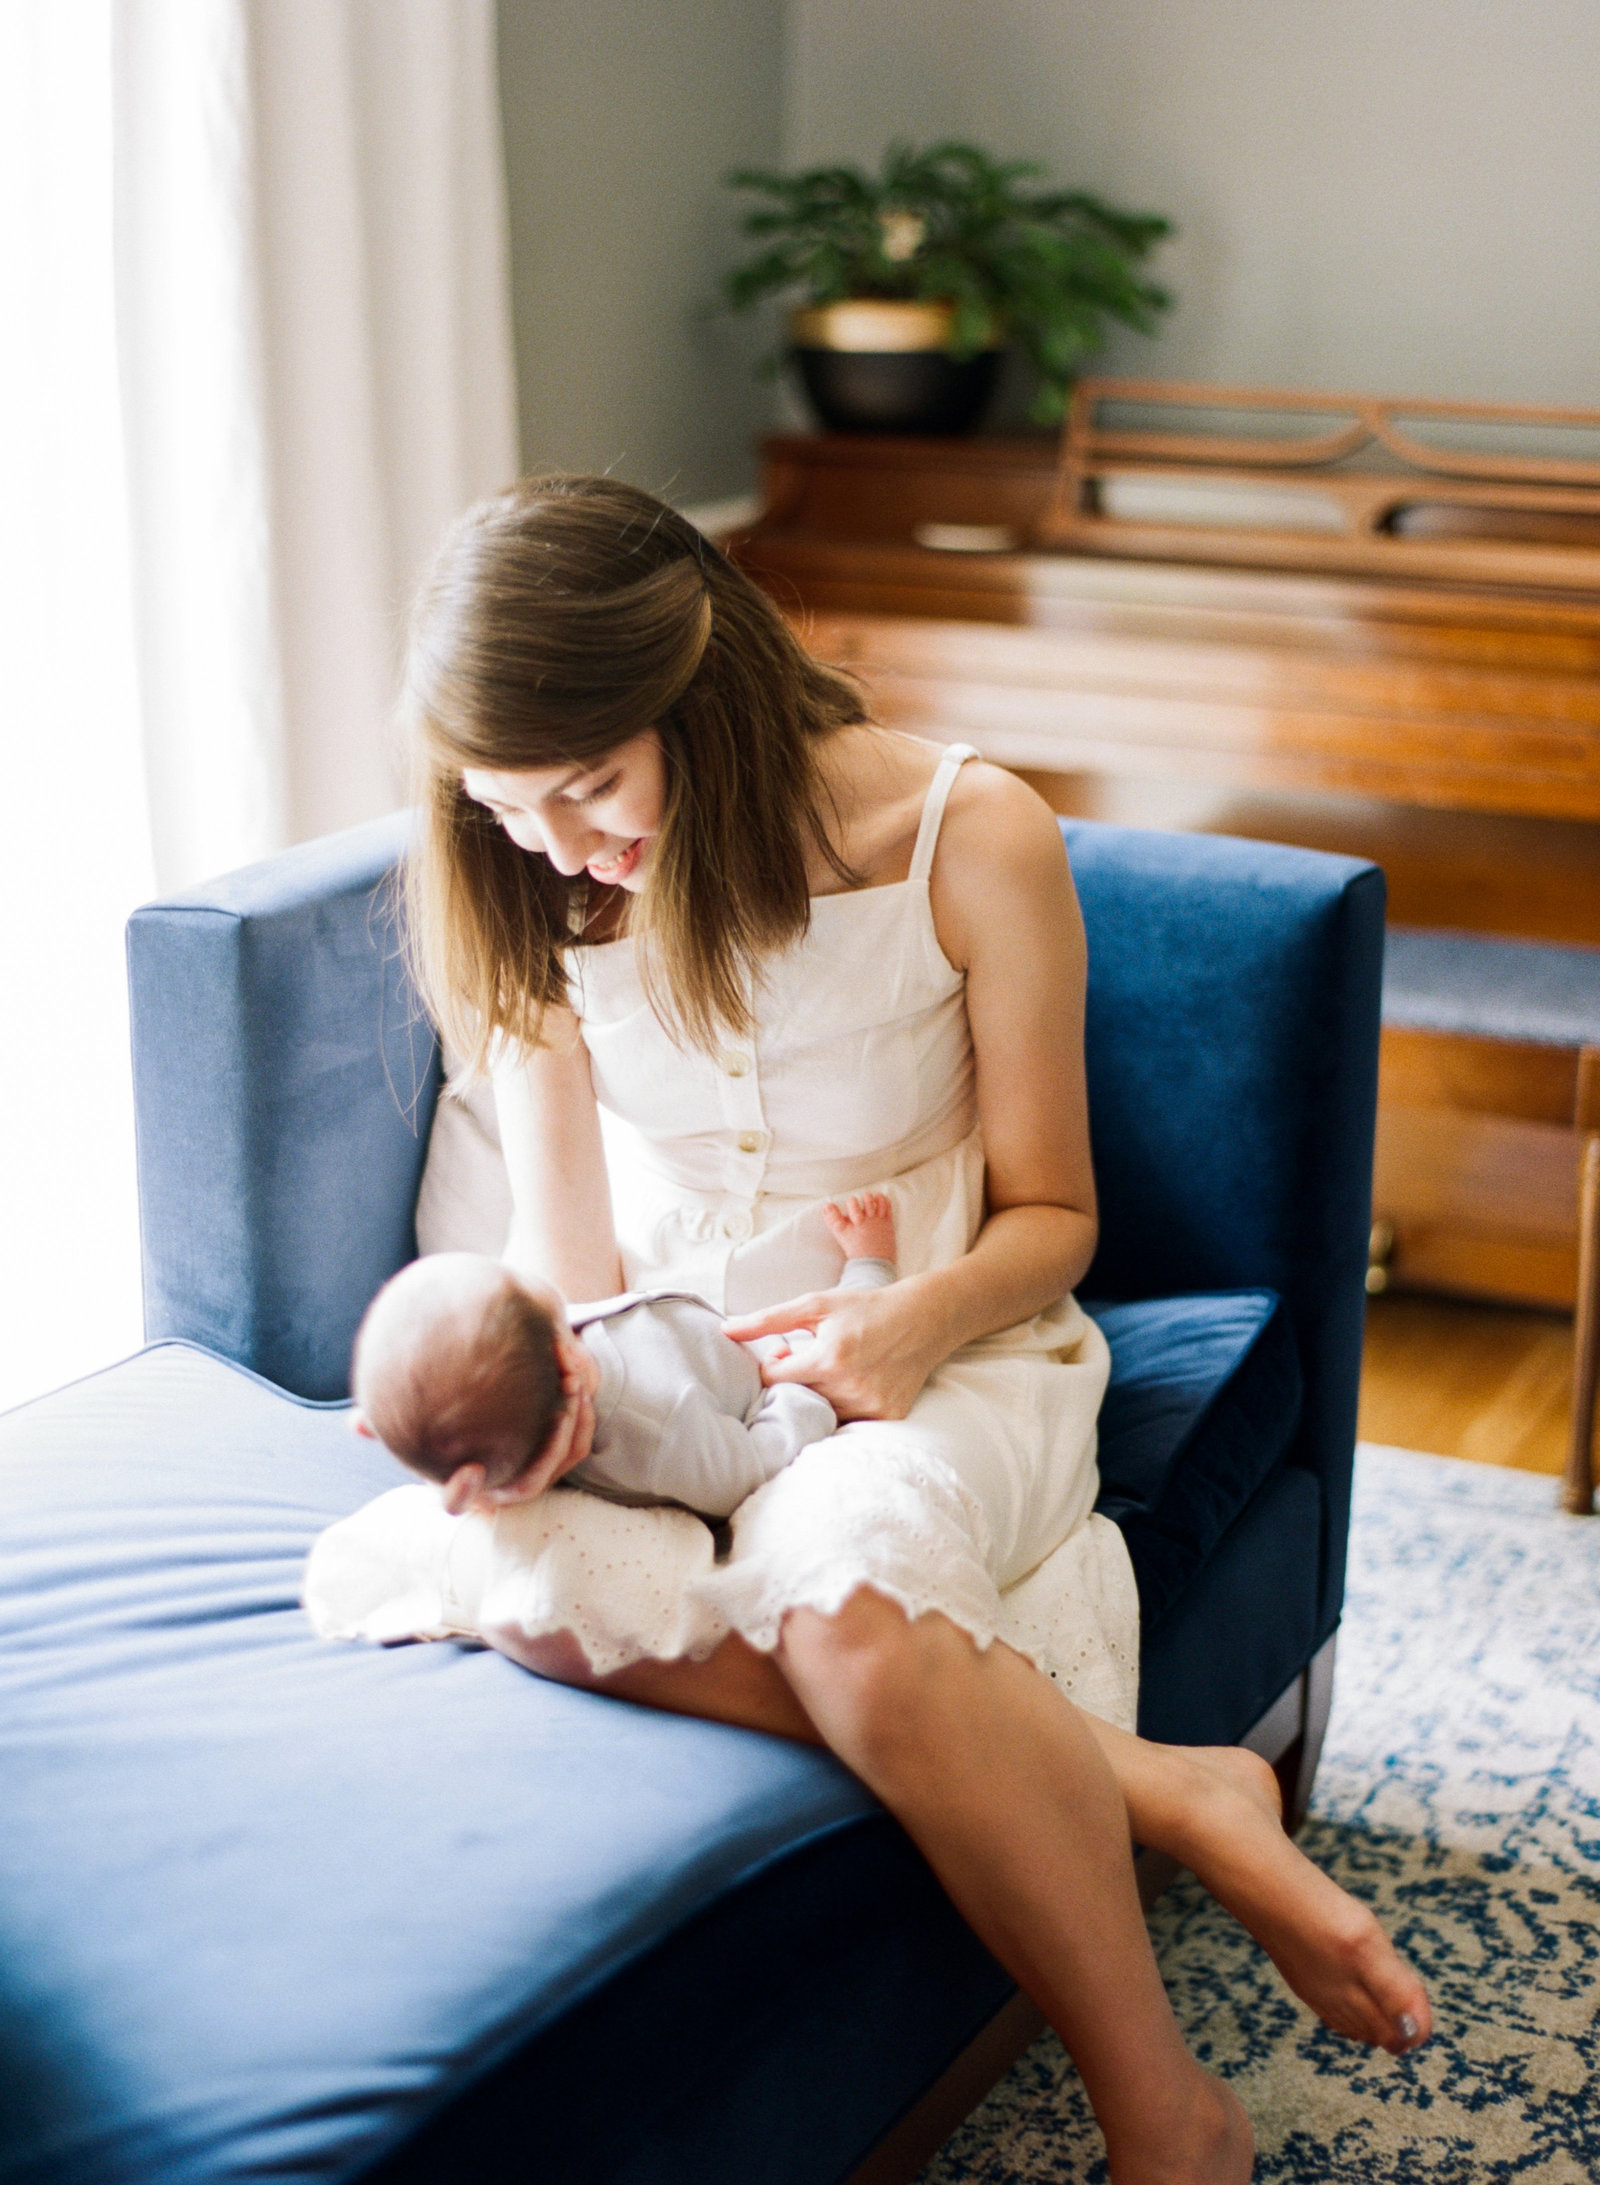 Mom snuggling her newborn baby boy on a blue couch while smiling at him during her Raleigh newborn session. Photographed by Raleigh newborn photographer A.J. Dunlap Photography